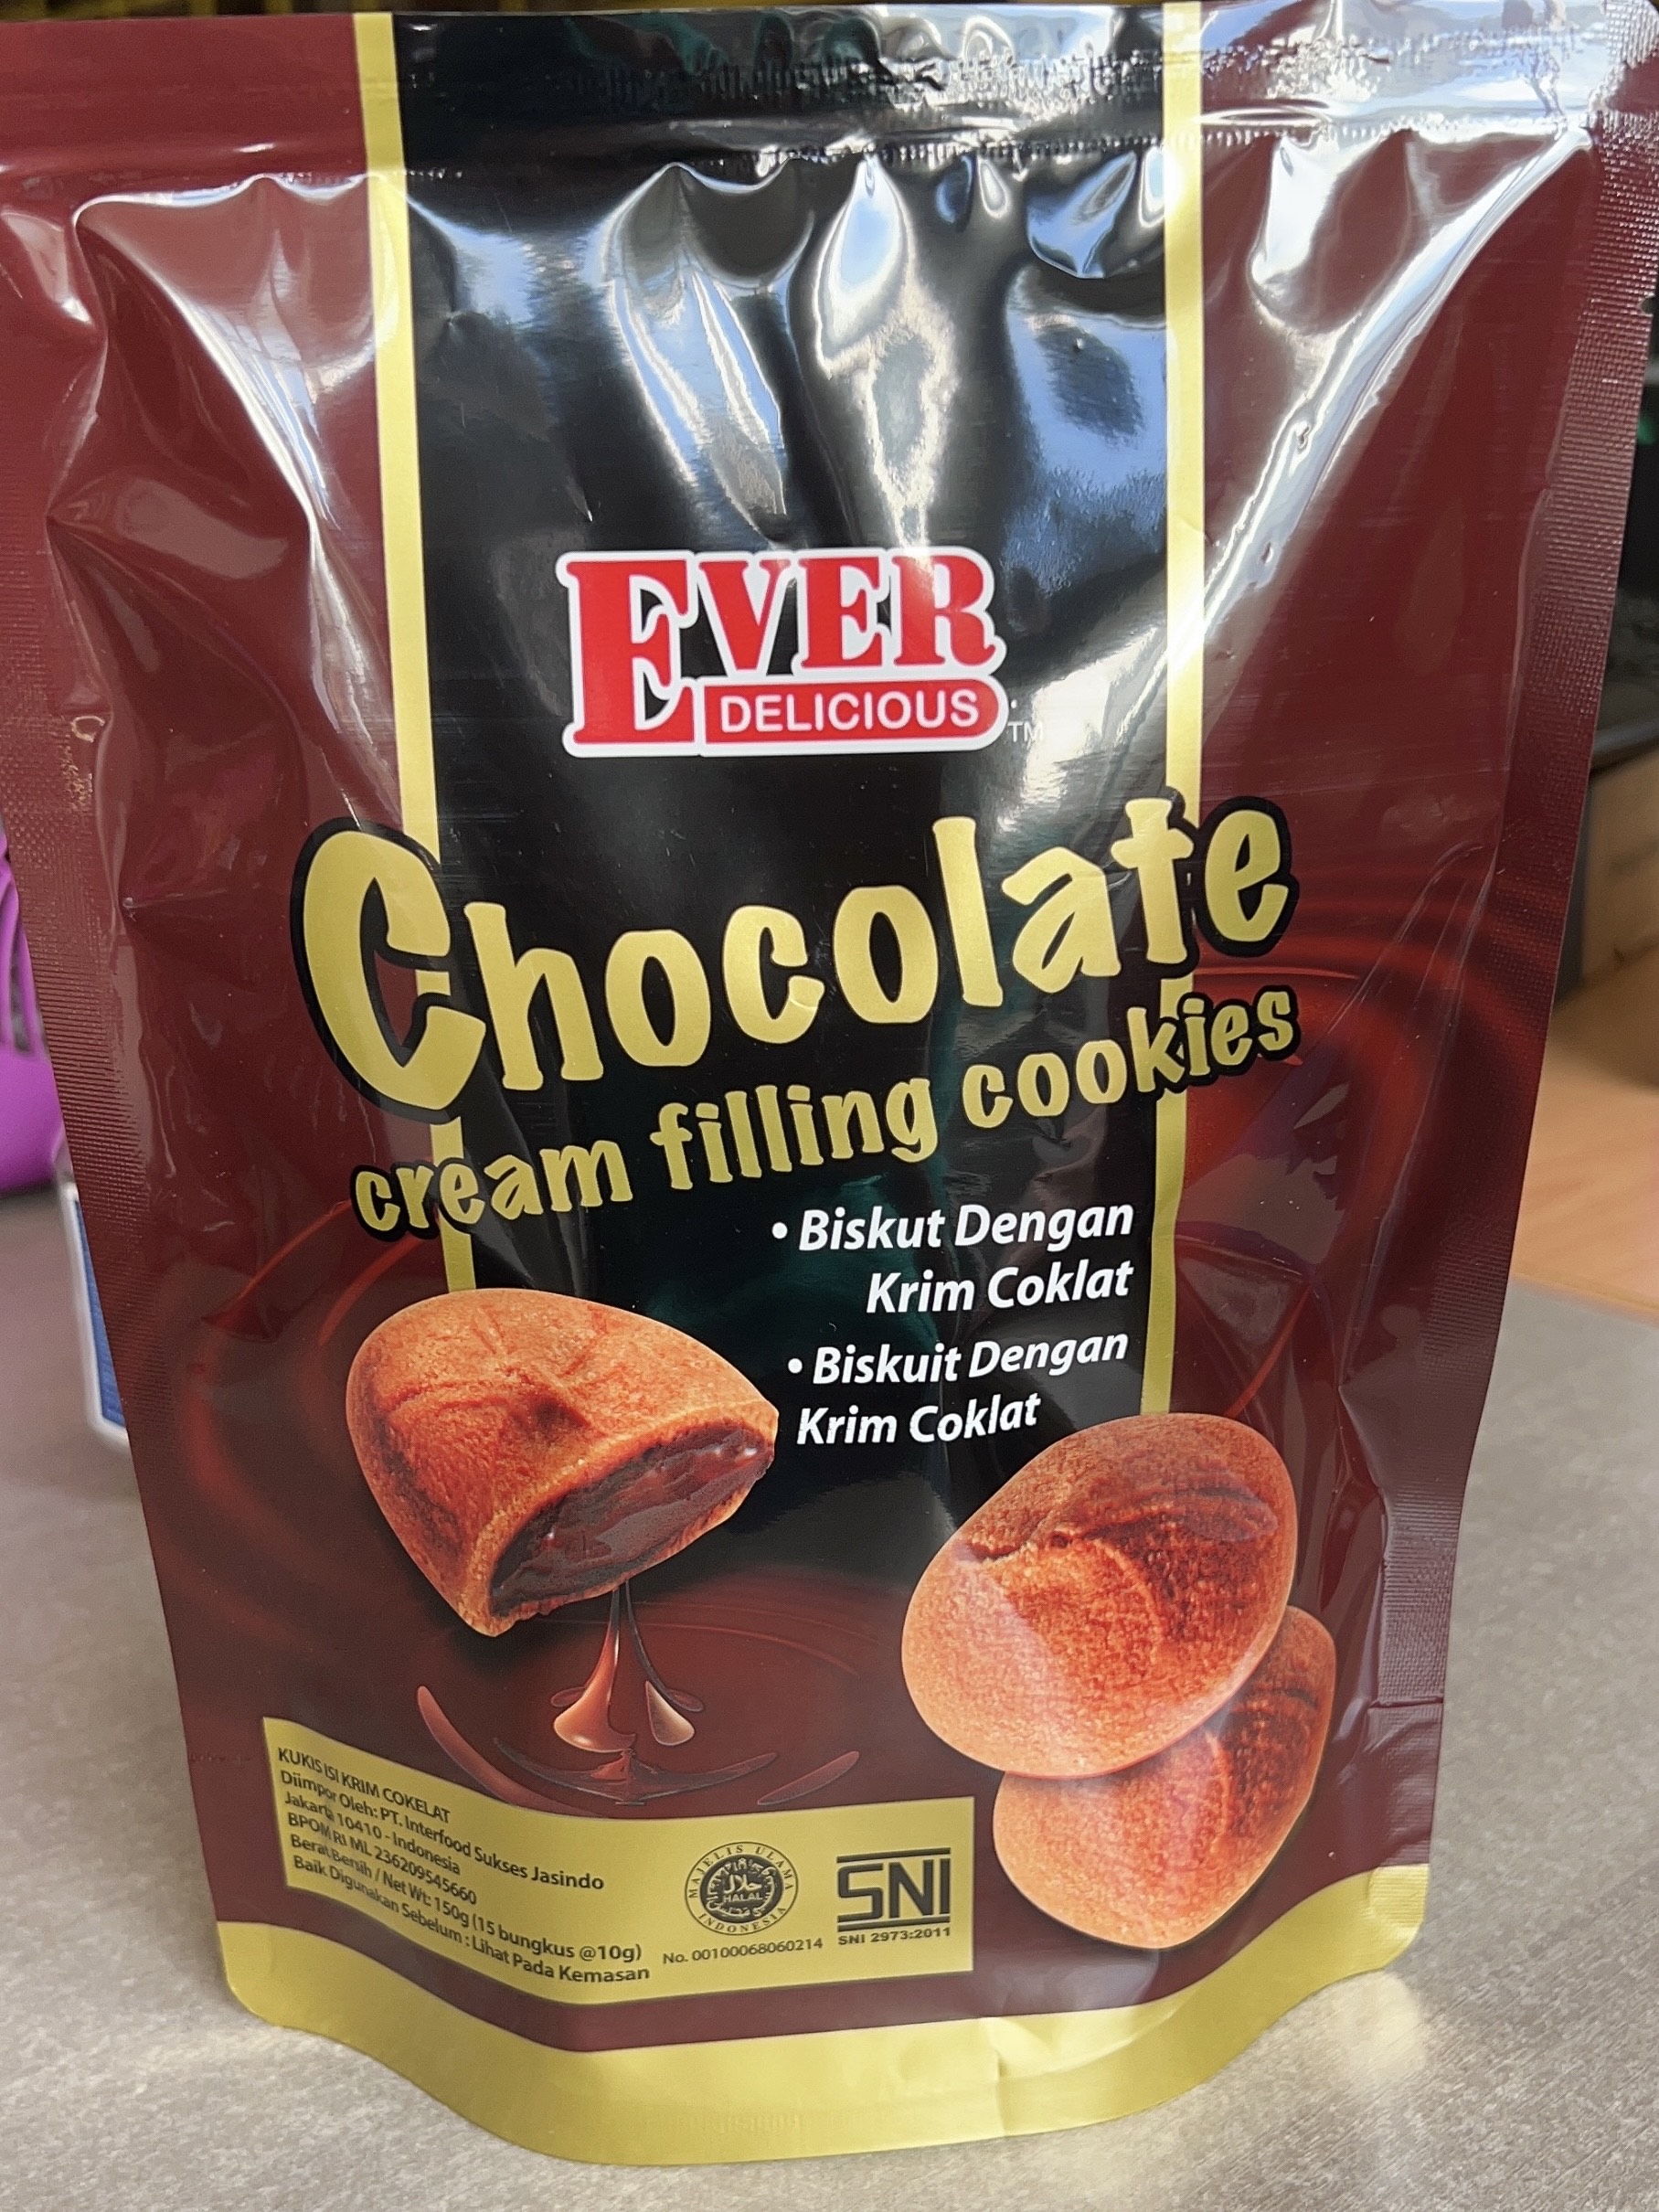 EVER DELICIOUS - CHOCOLATE CREAM FILLING COOKIES - 150G